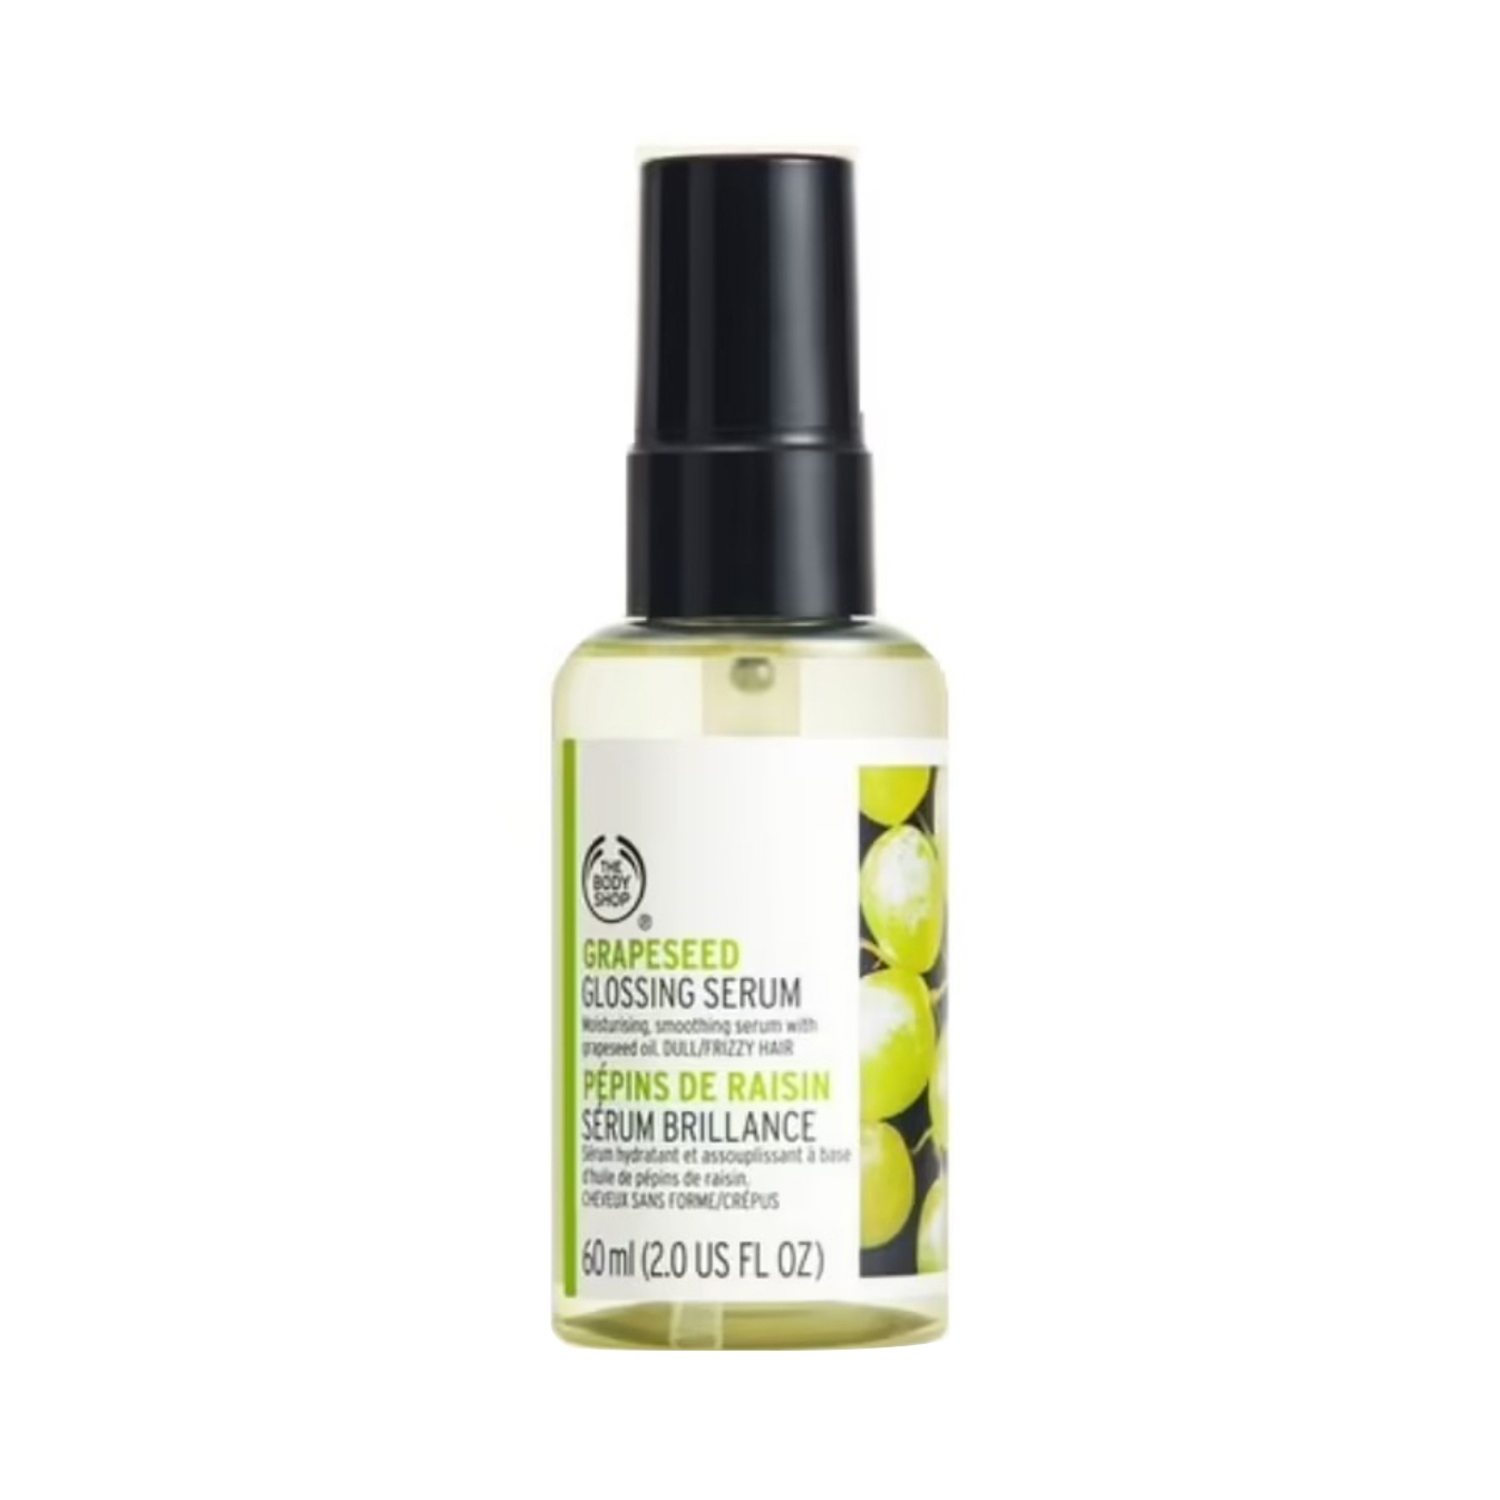 The Body Shop | The Body Shop Grapeseed Glossing Serum (60ml)